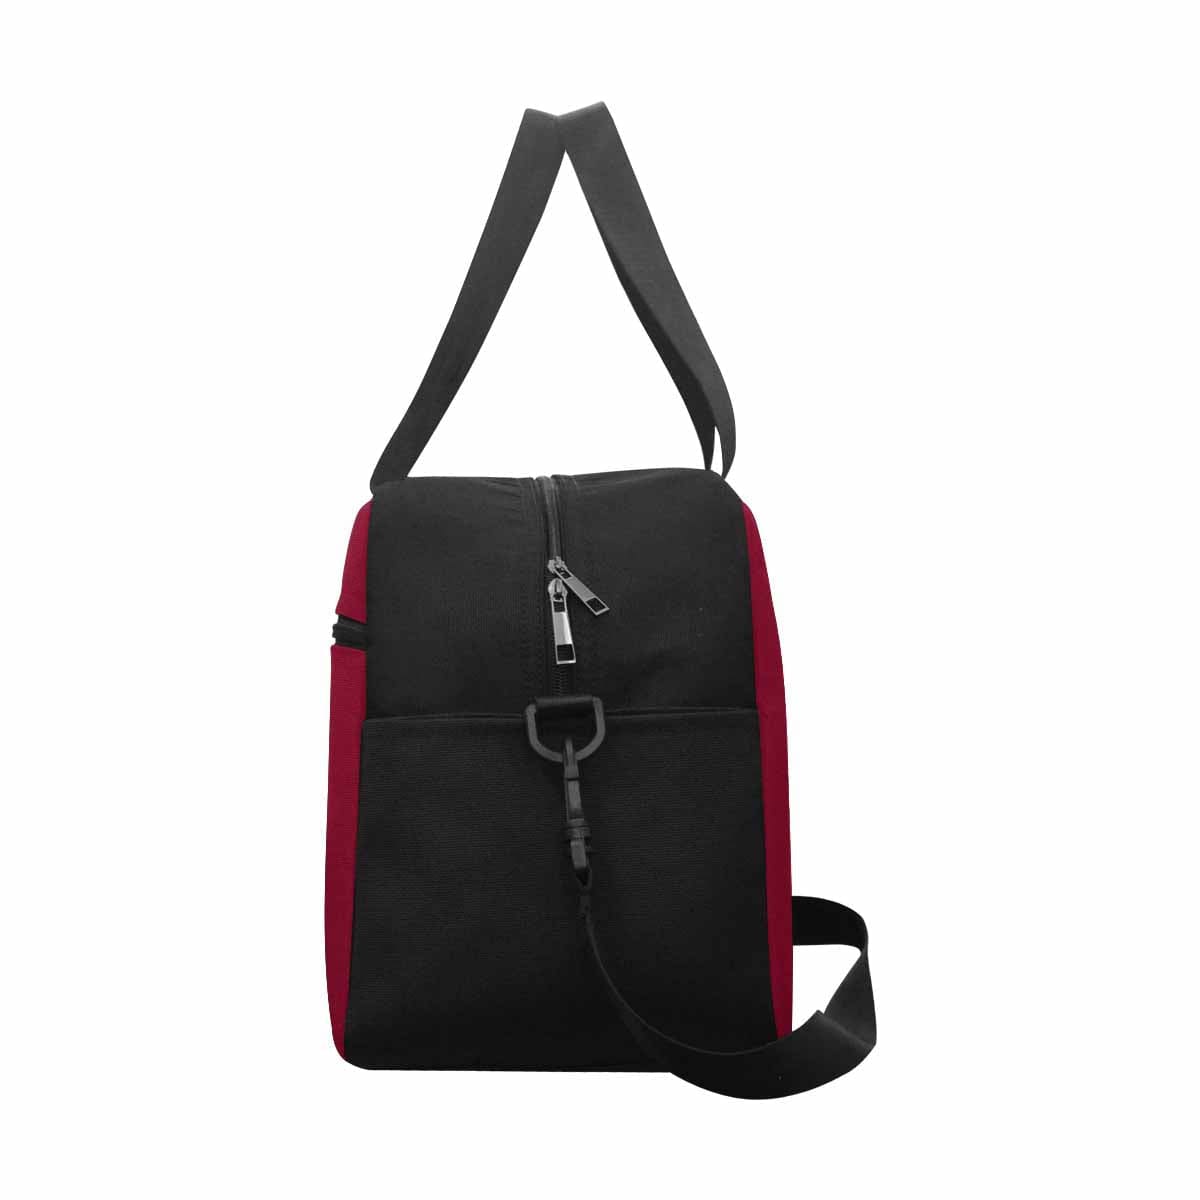 Burgundy Red Tote And Crossbody Travel Bag - Bags | Travel Bags | Crossbody